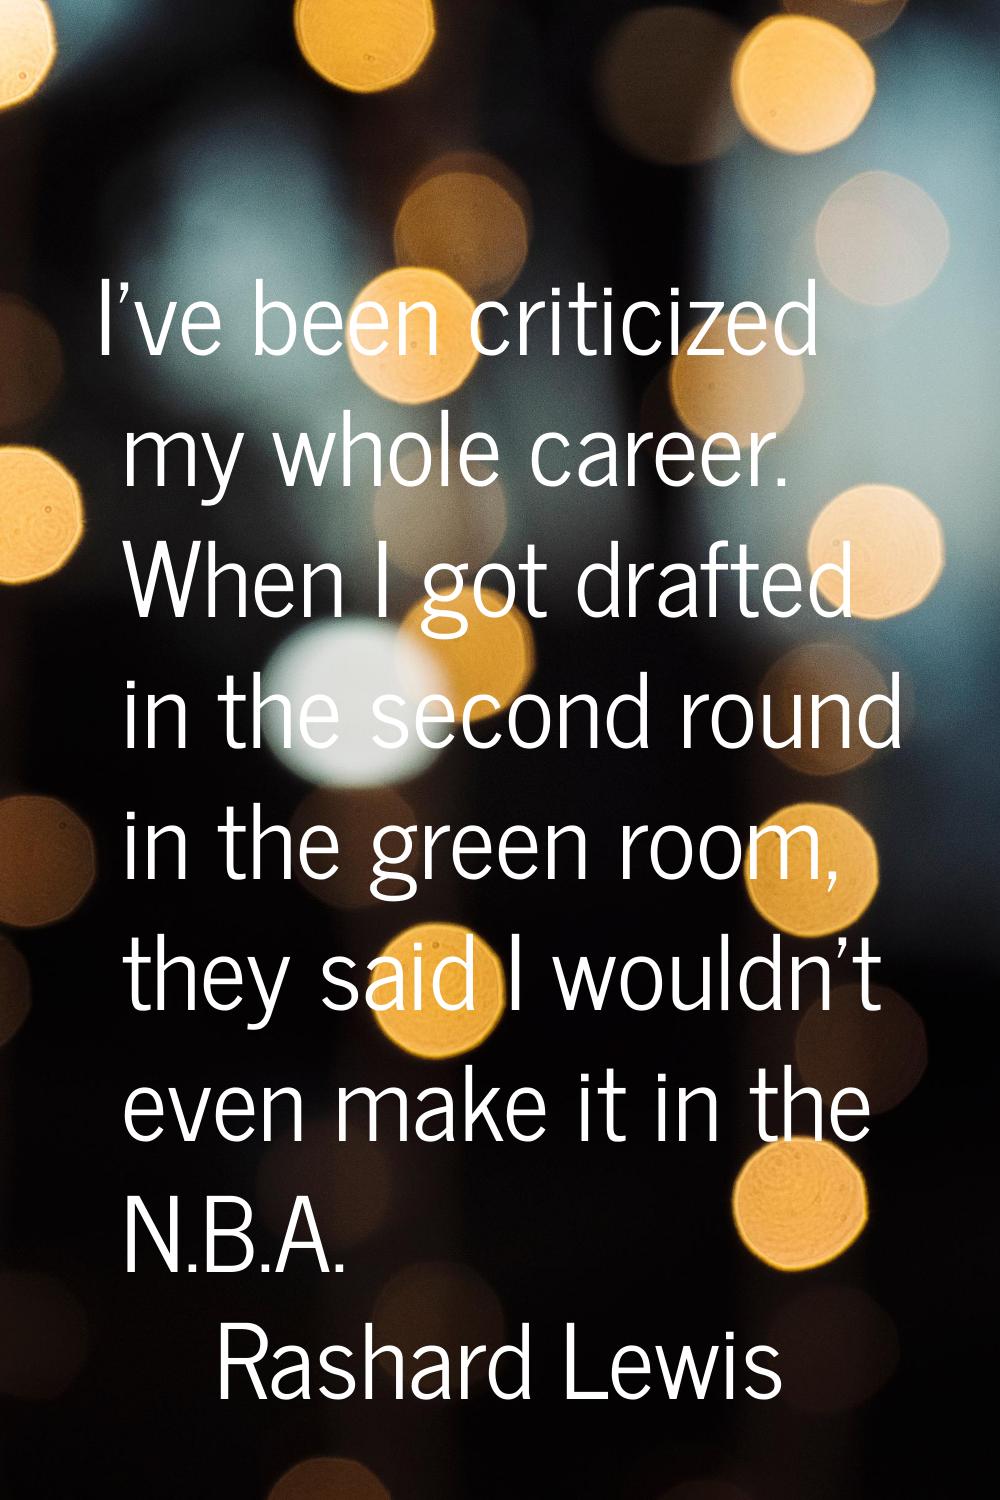 I've been criticized my whole career. When I got drafted in the second round in the green room, the